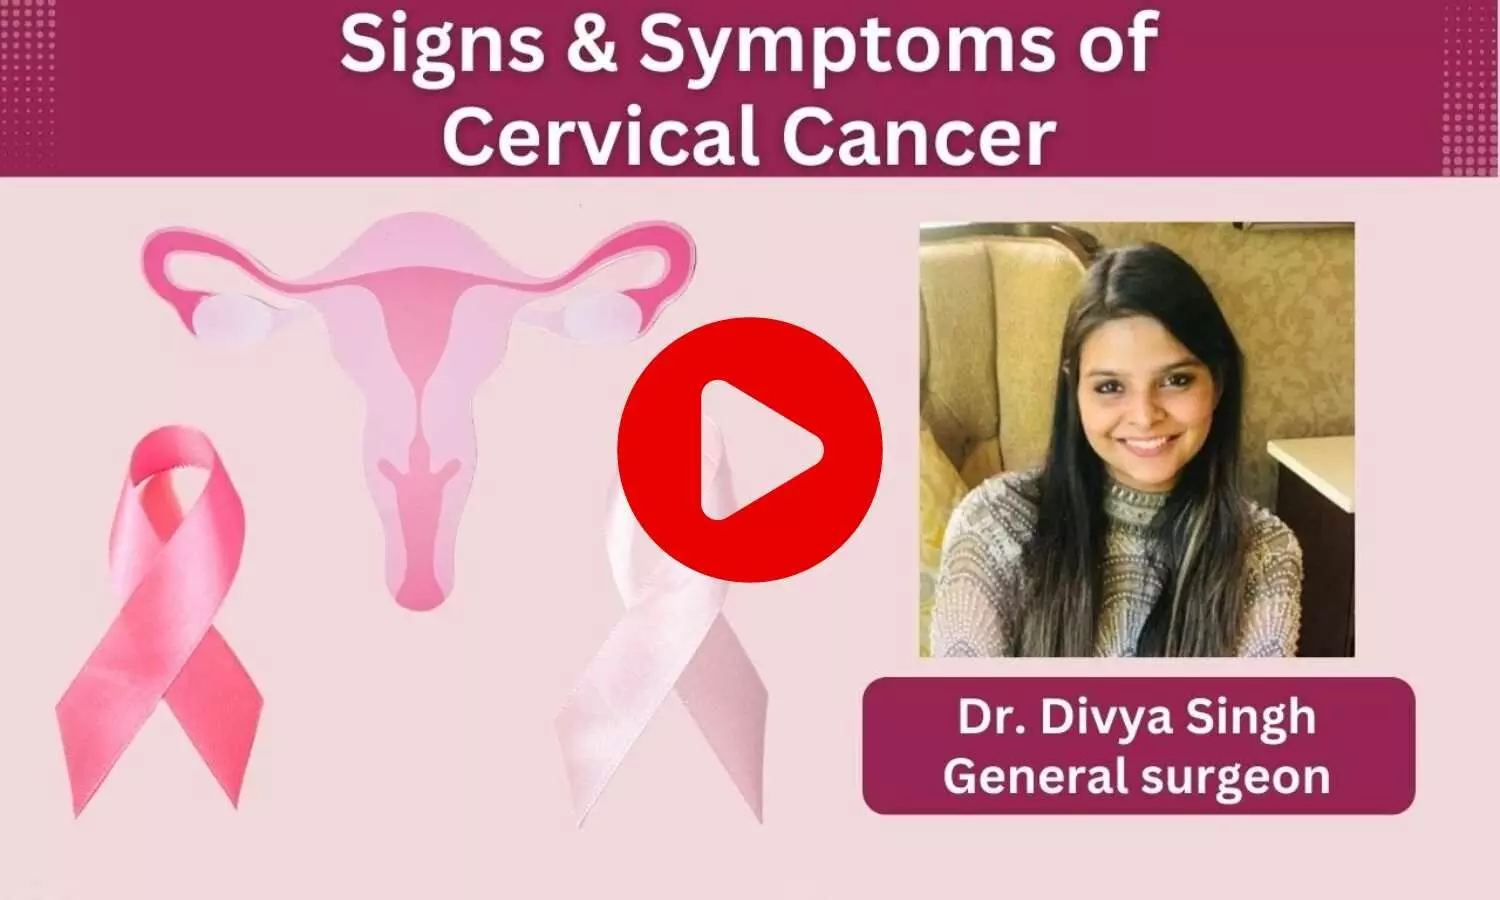 What are the possible characteristic signs and symptoms of Cervical Cancer? - Ft. Dr. Divya Singh